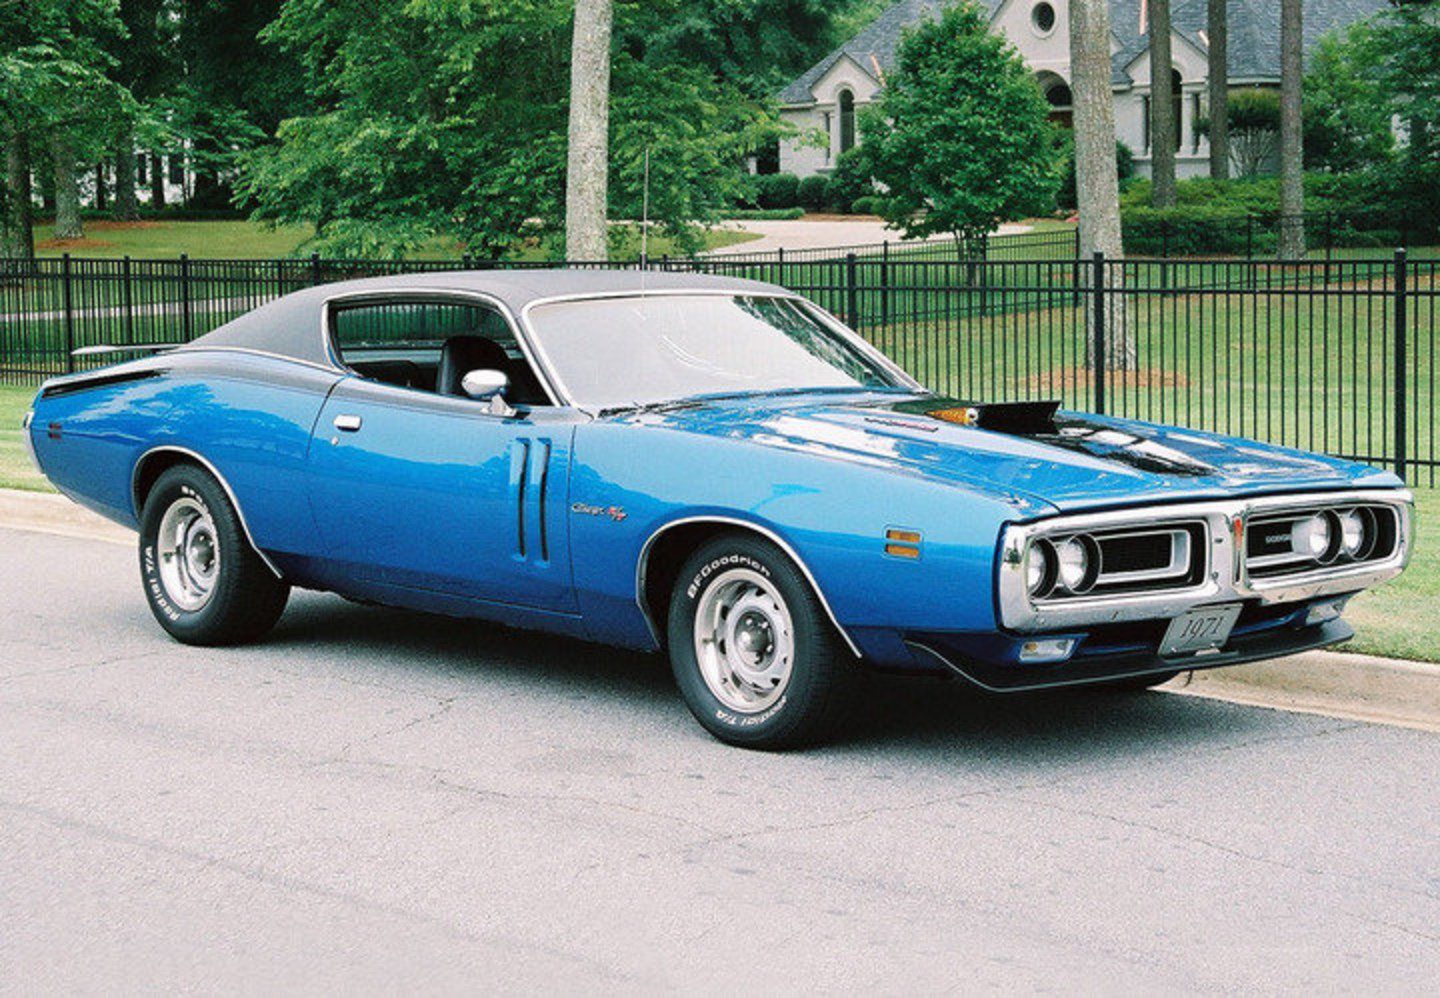 1971-dodge-charger-rt-440 | Flickr - Photo Sharing!